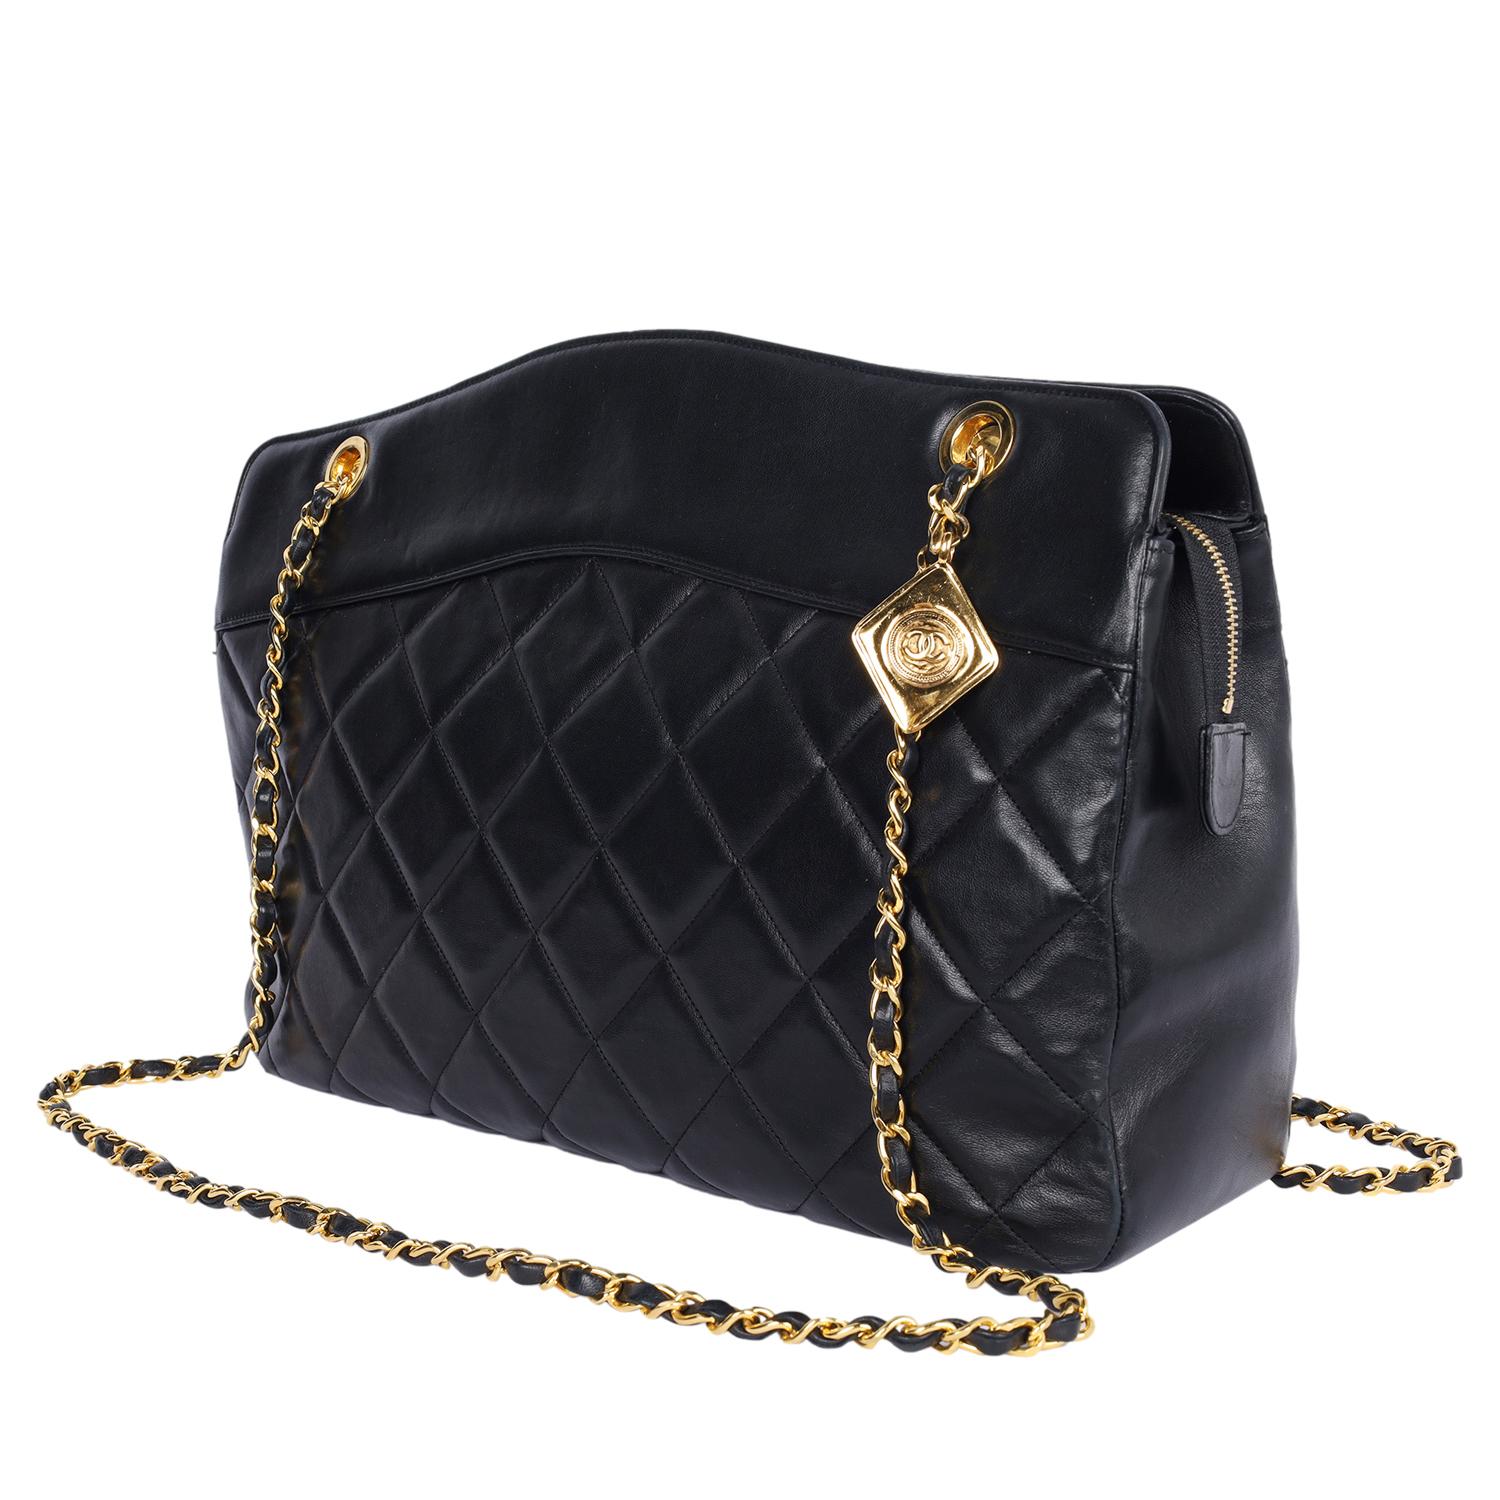 Chanel Black Quilted Lambskin Leather Crossbody Bag 1989 For Sale 3